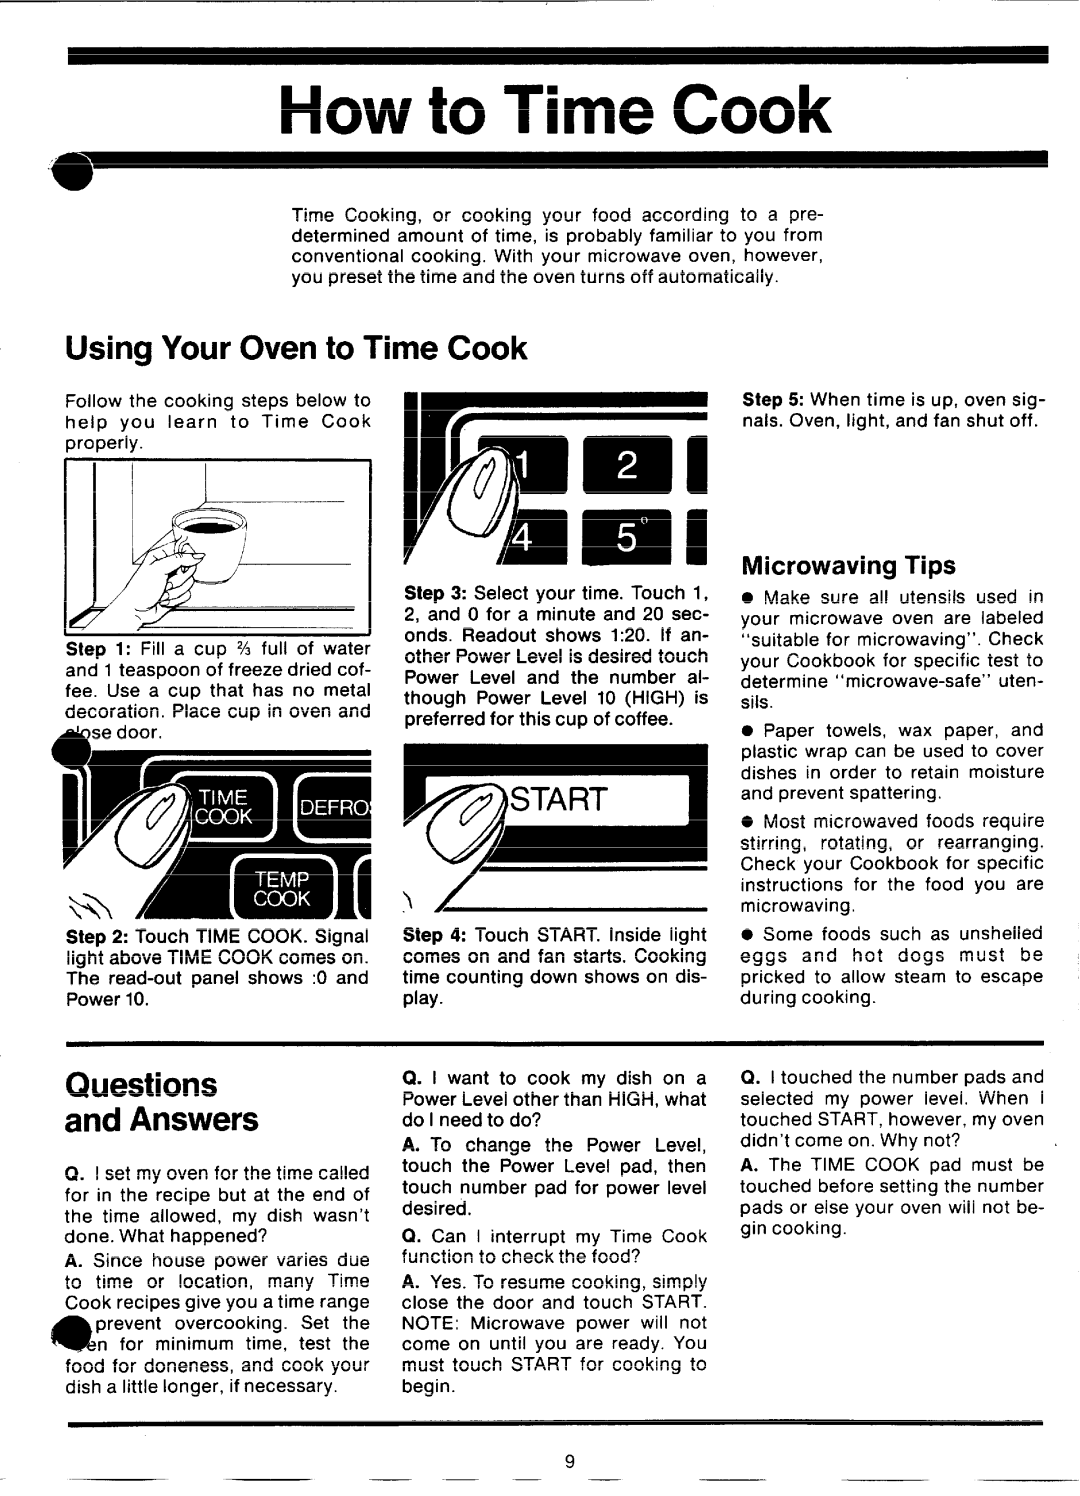 GE JVM57, 862A300PI, 49-4492 manual How to Time Cook, Using Your Oven to Time Cook, Questions and Answers, Microwaving Tips 